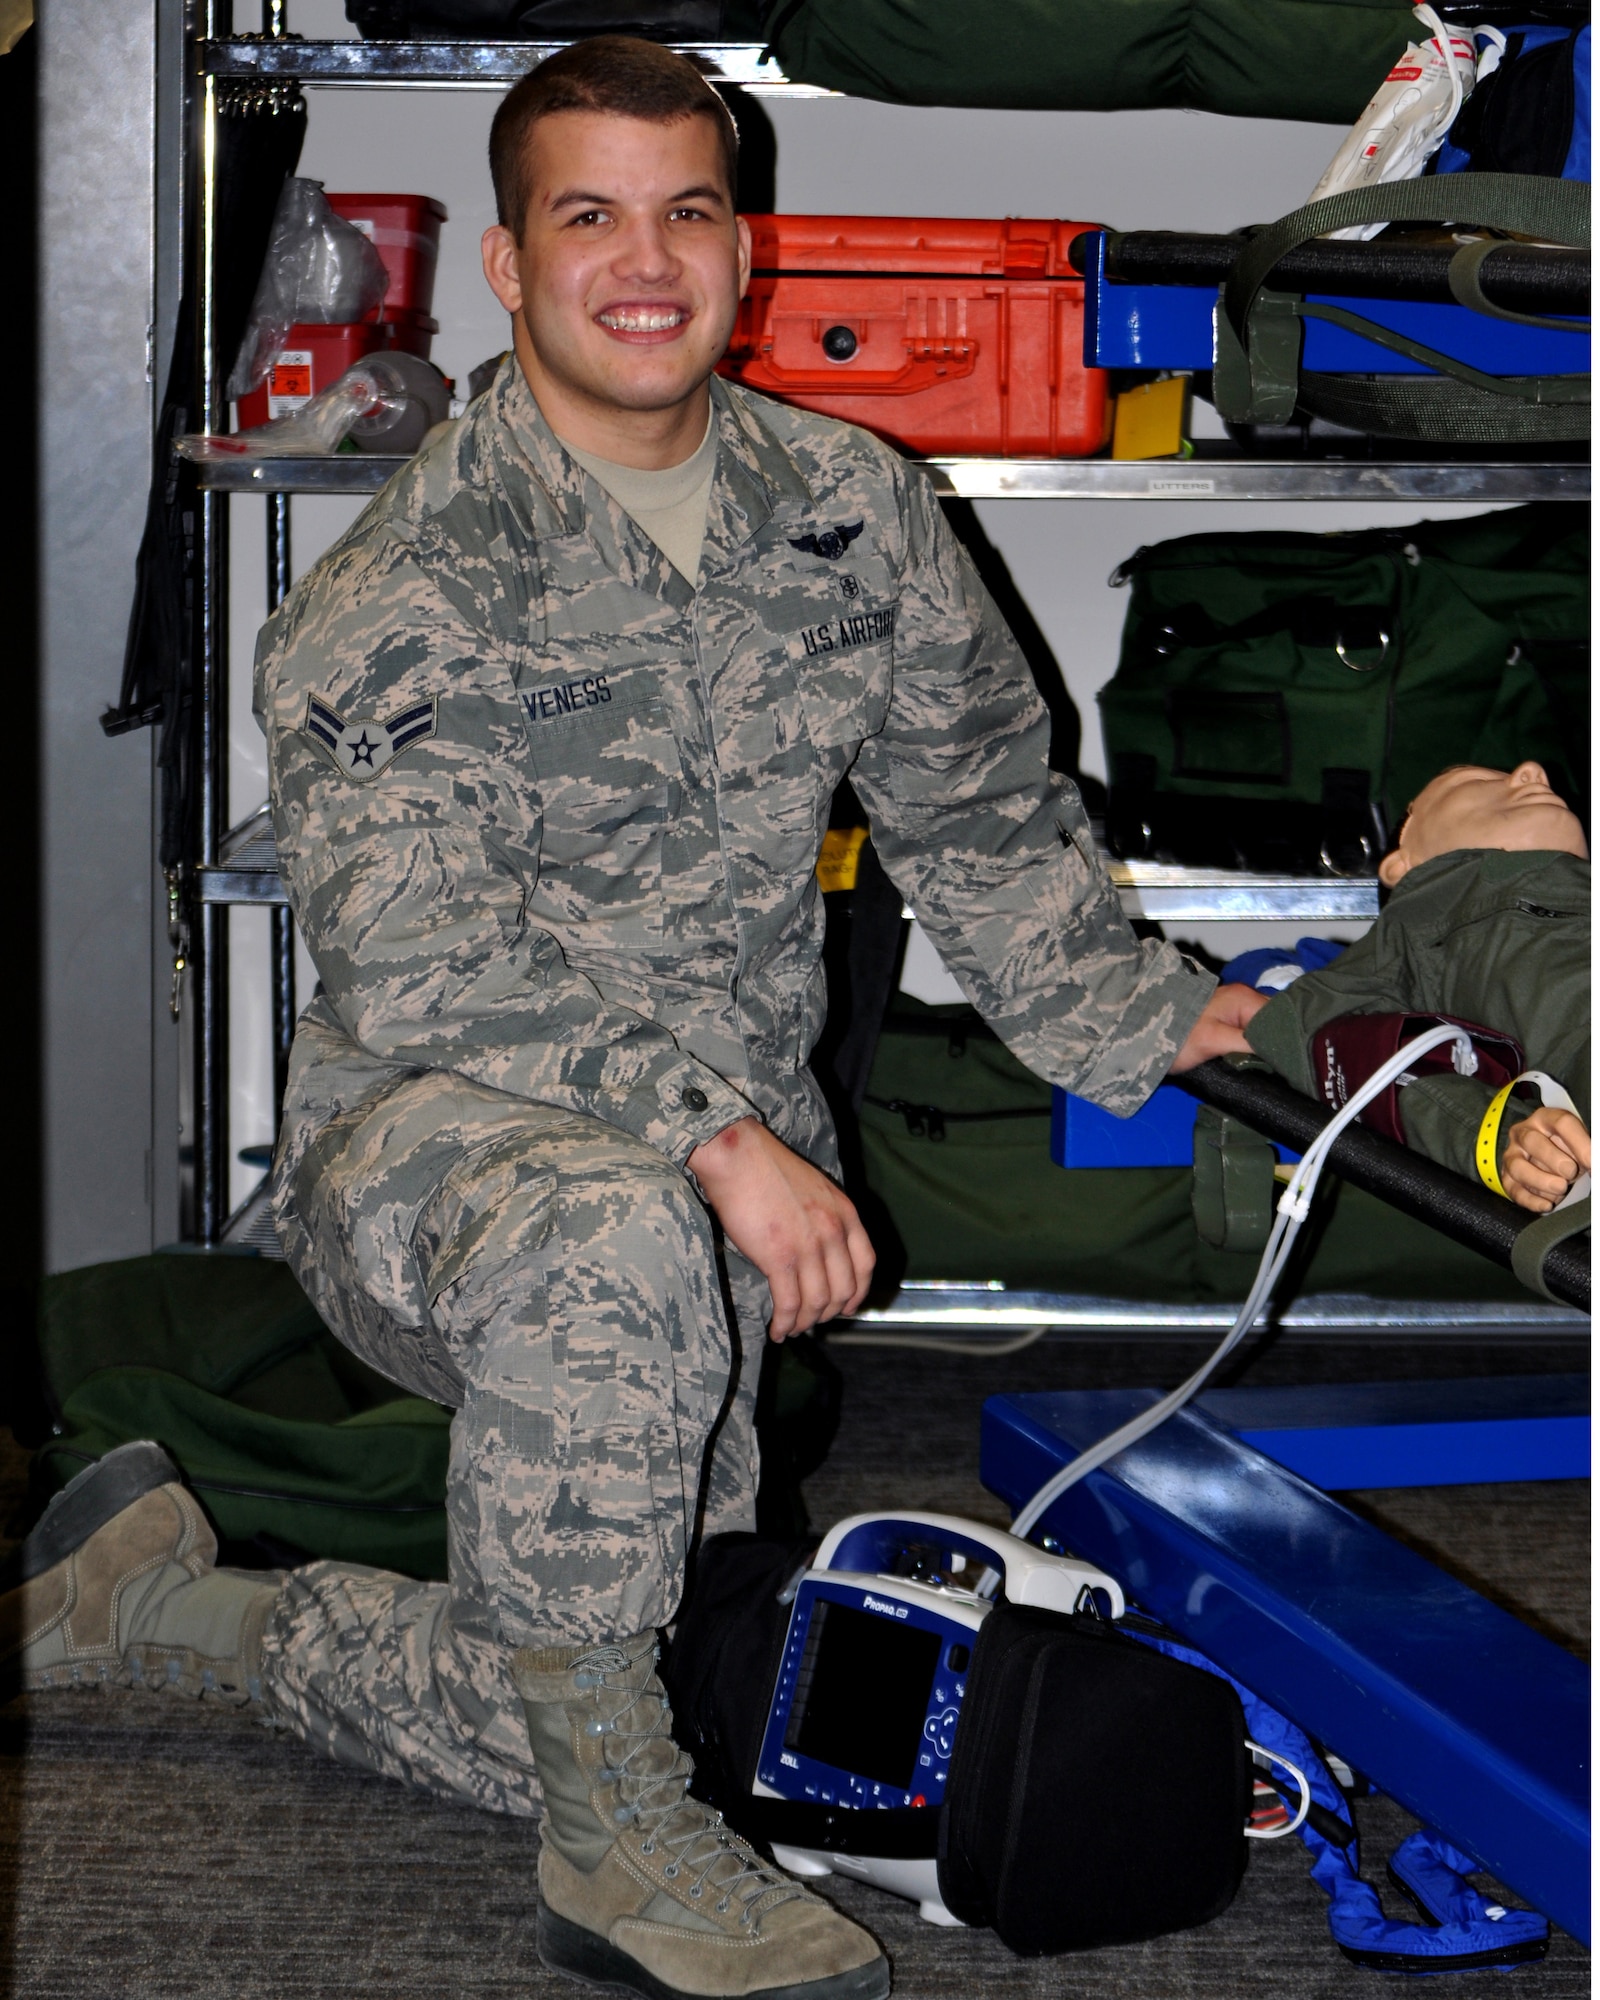 Airman 1st Class Jeffrey Veness, 445th Aeromedical Evacuation Squadron medical technician, is the 445th Airlift Wing March Spotlight Performer.